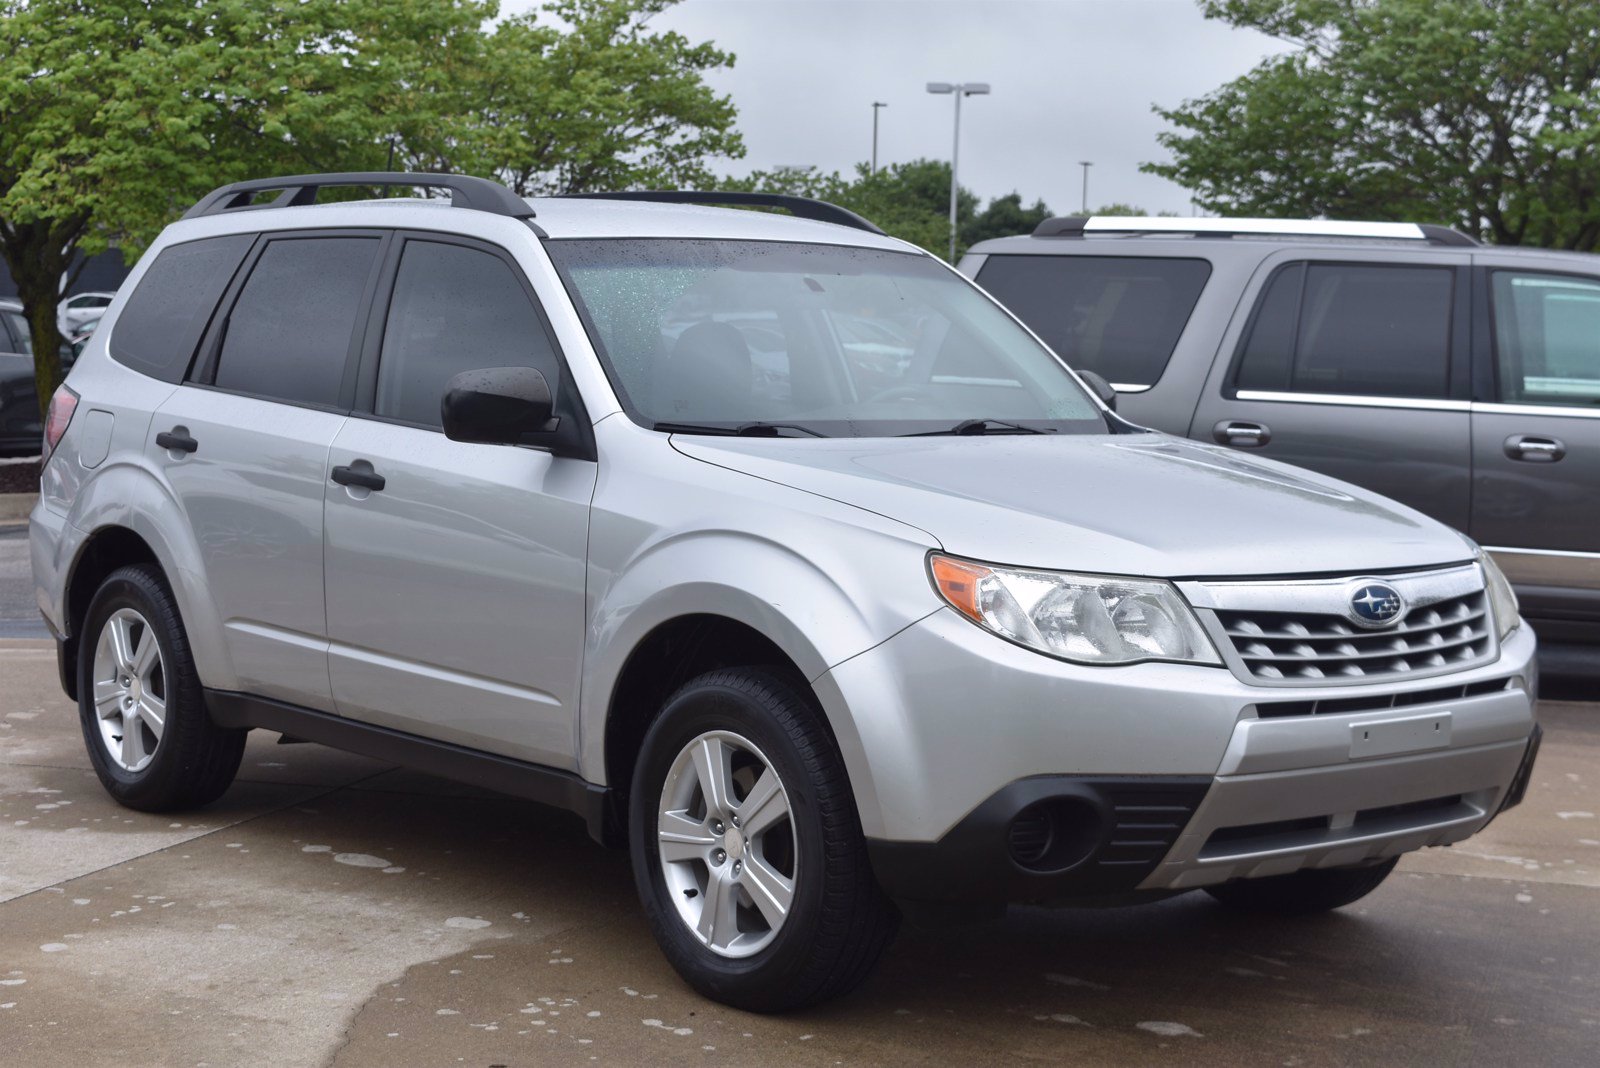 PreOwned 2011 Subaru Forester 2.5X AWD Sport Utility in